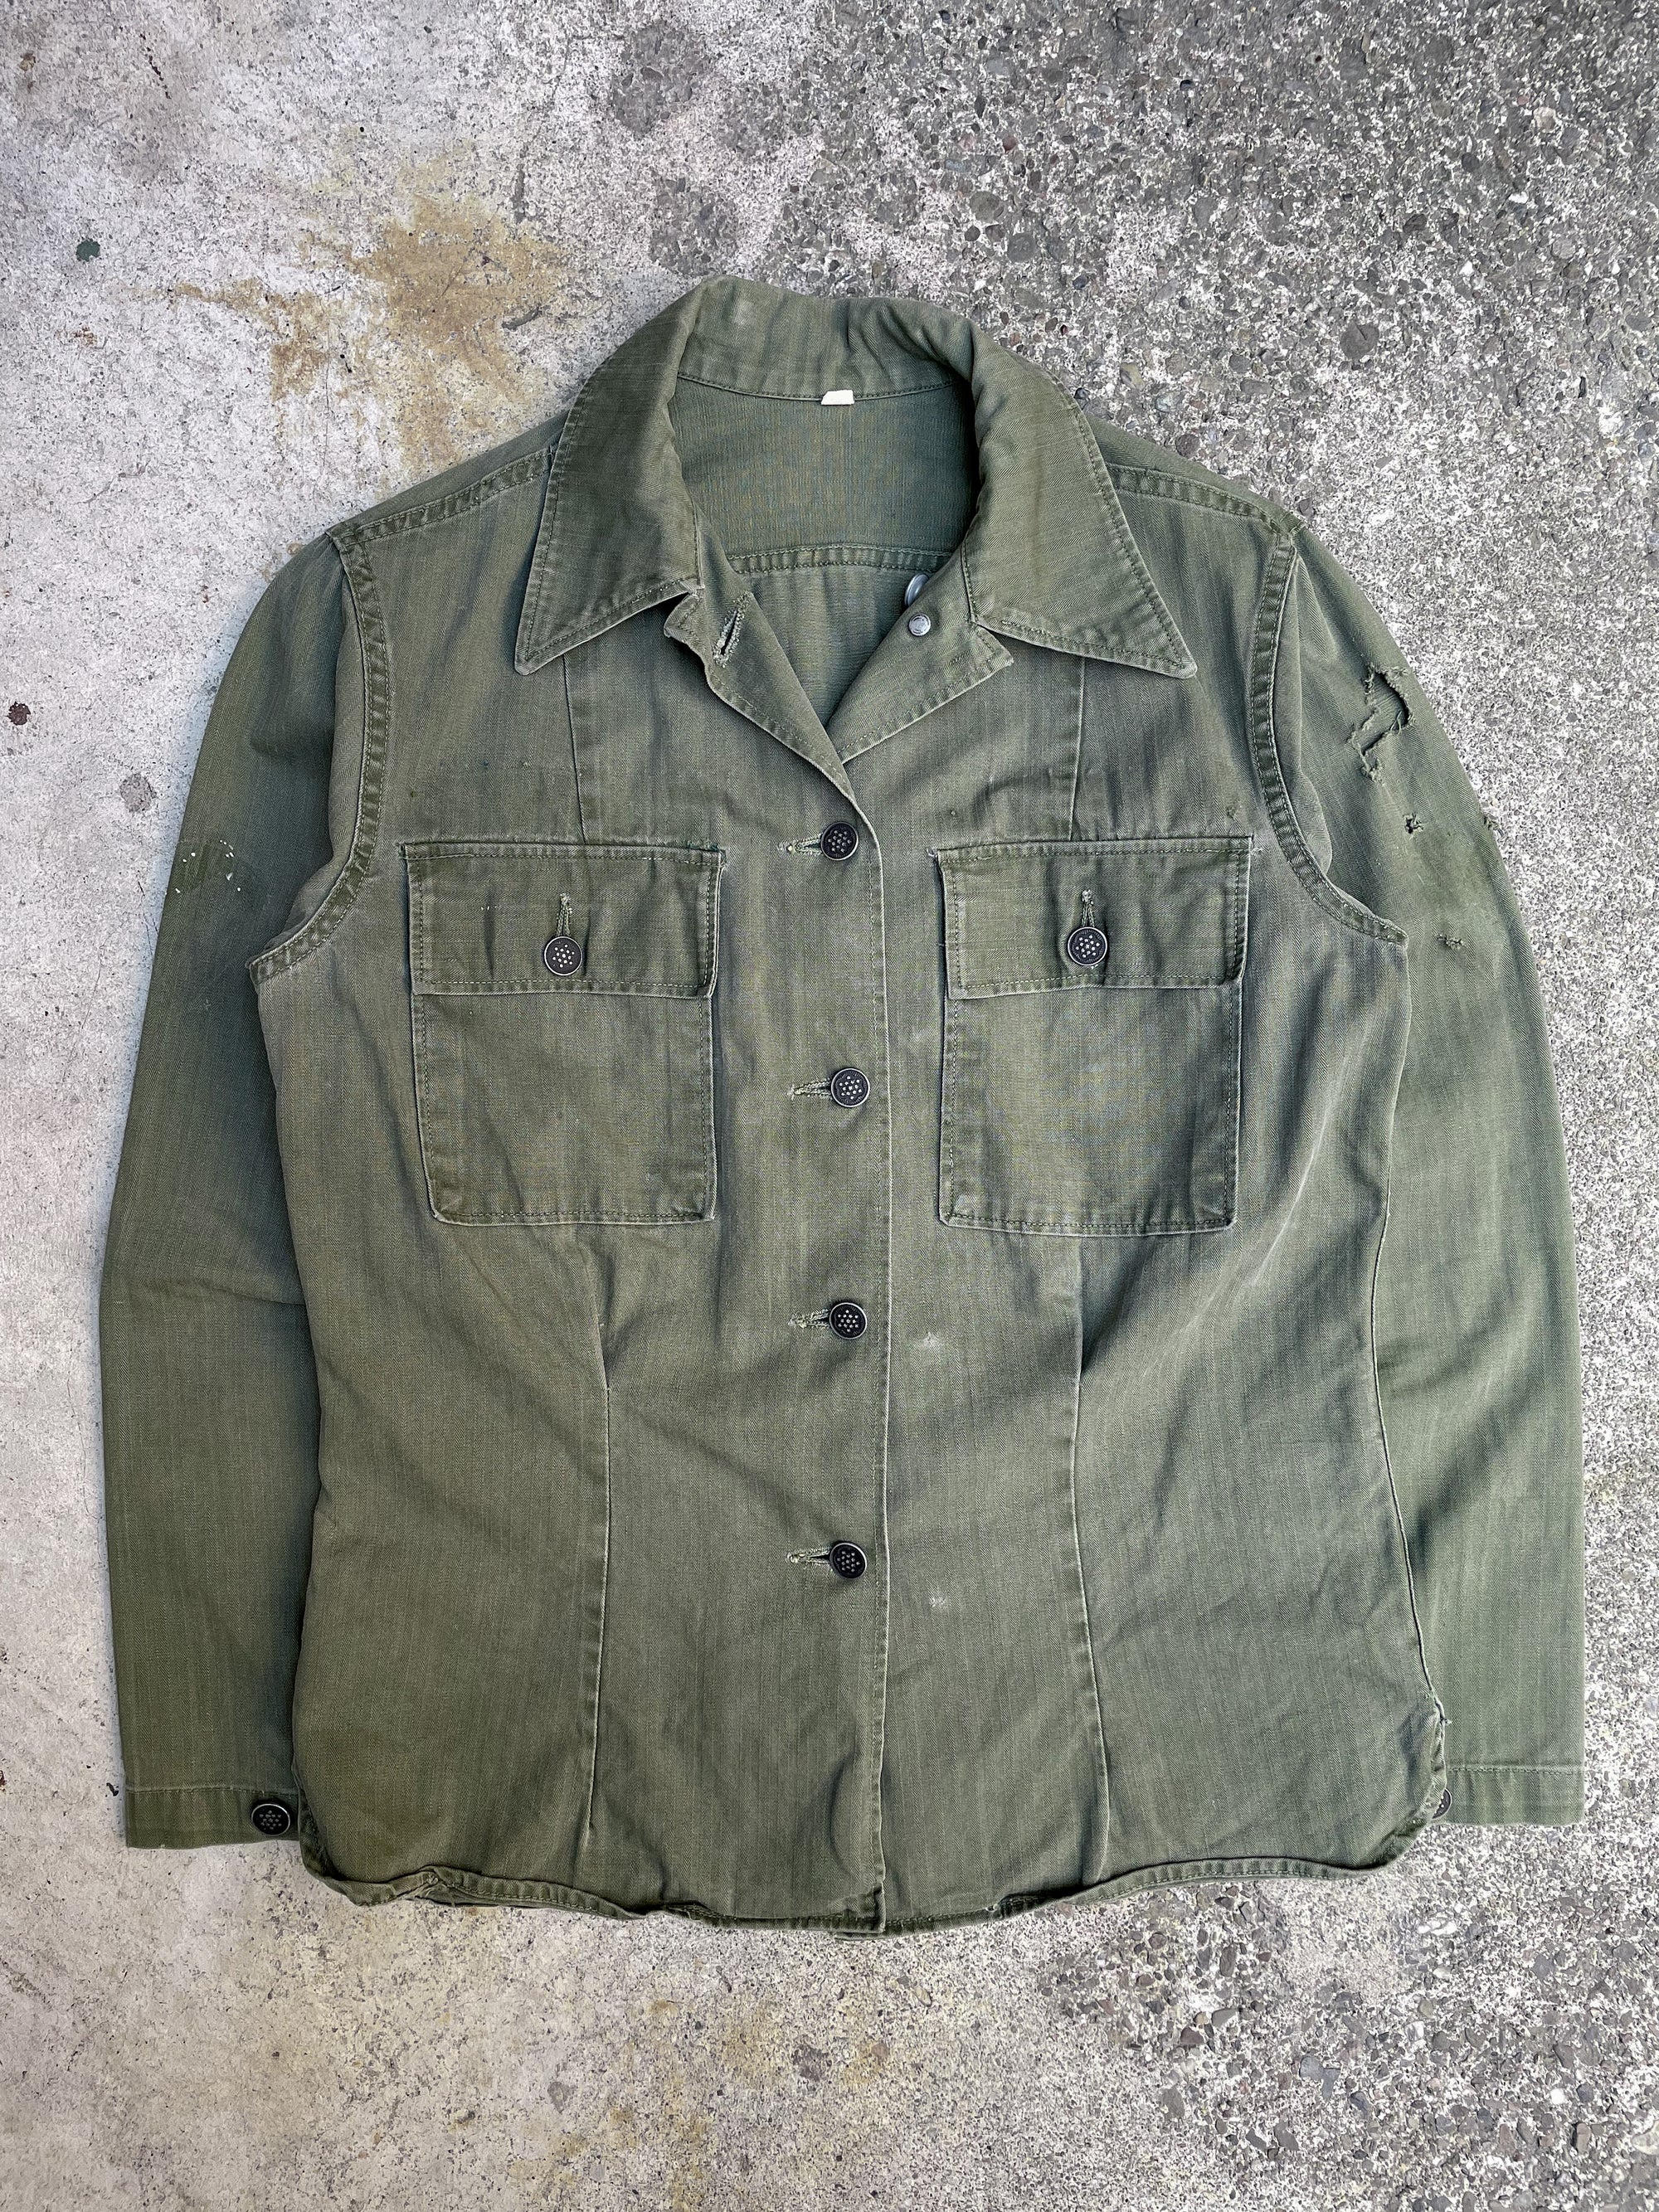 1940s/50s Faded Army Green HBT 13-Star Shirt